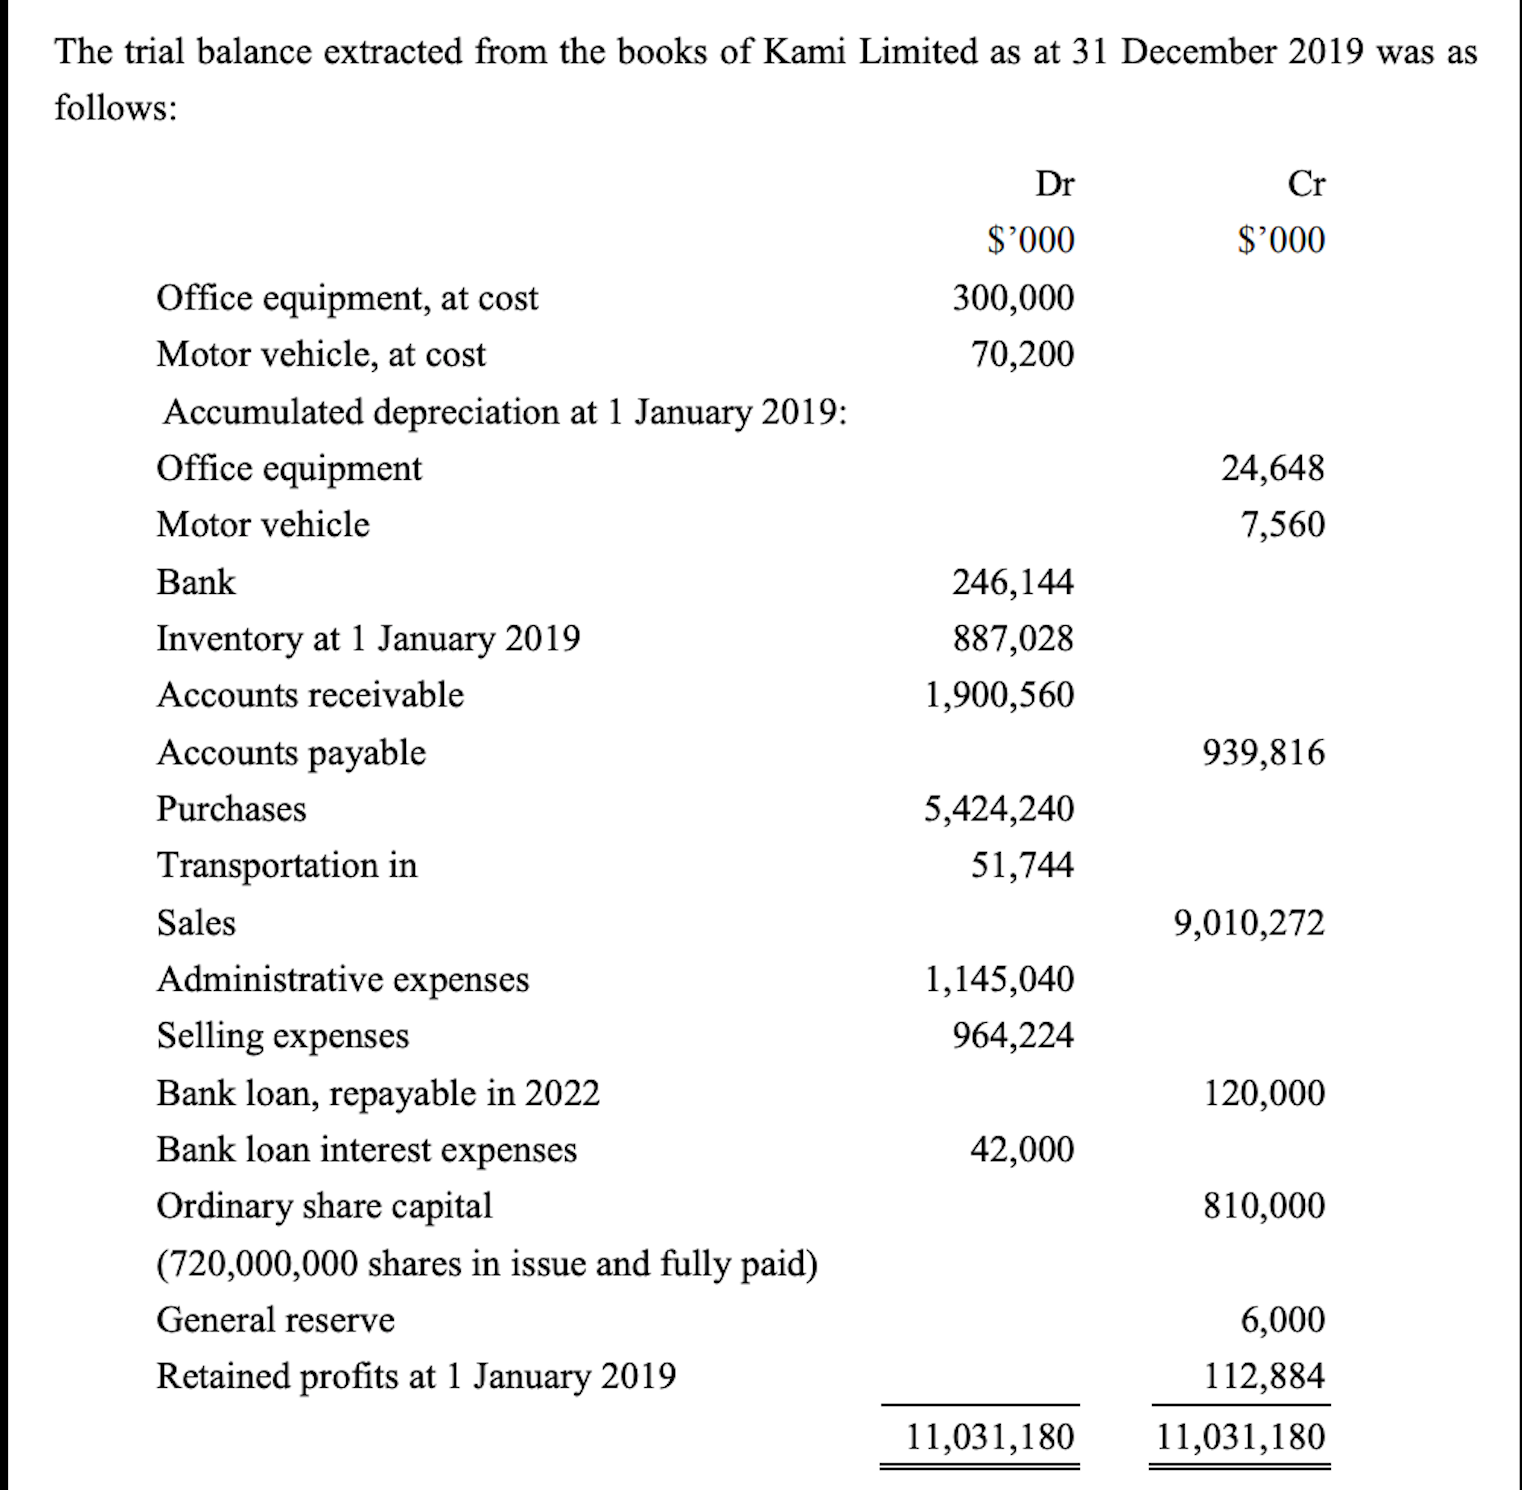 The trial balance extracted from the books of Kami Limited as at 31 December 2019 was as
follows:
Dr
Cr
$'000
000.$
Office equipment, at cost
300,000
Motor vehicle, at cost
70,200
Accumulated depreciation at 1 January 2019:
Office equipment
24,648
Motor vehicle
7,560
Bank
246,144
Inventory at 1 January 2019
887,028
Accounts receivable
1,900,560
Accounts payable
939,816
Purchases
5,424,240
Transportation in
51,744
Sales
9,010,272
Administrative expenses
1,145,040
Selling expenses
964,224
Bank loan, repayable in 2022
120,000
Bank loan interest expenses
42,000
Ordinary share capital
810,000
(720,000,000 shares in issue and fully paid)
General reserve
6,000
Retained profits at 1 January 2019
112,884
11,031,180
11,031,180
